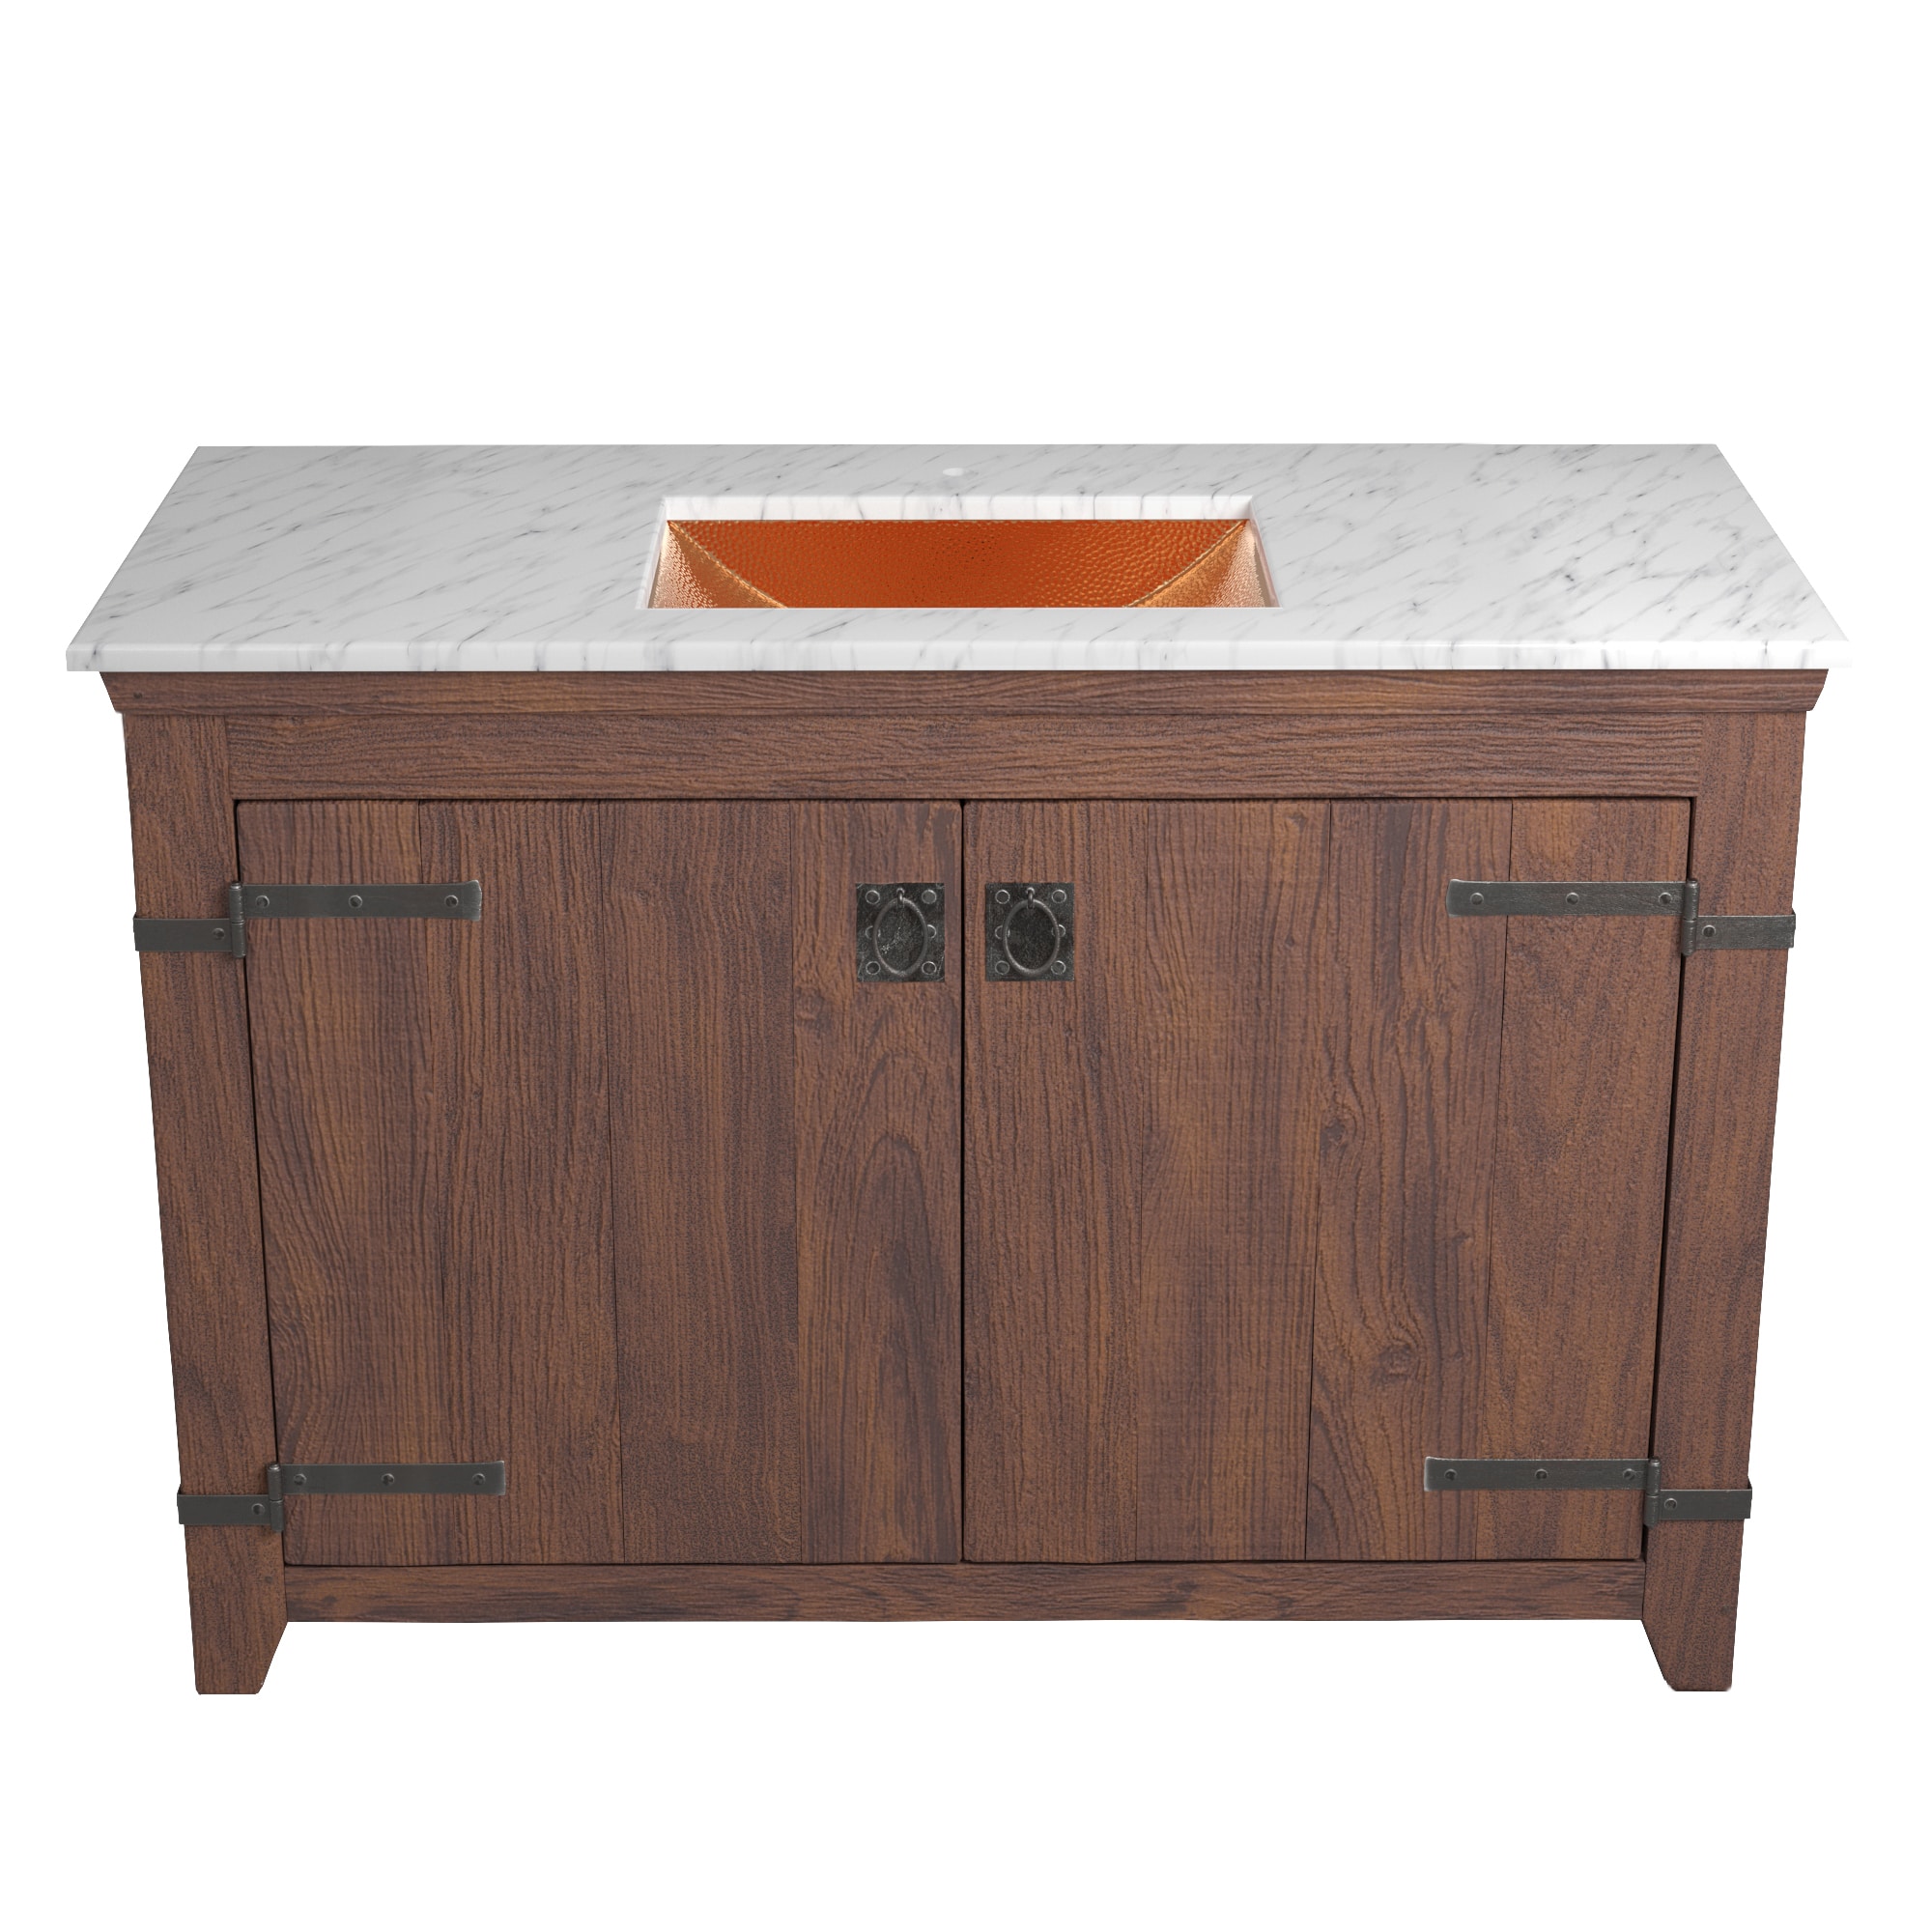 Native Trails 48" Americana Vanity in Chestnut with Carrara Marble Top and Avila in Polished Copper, Single Faucet Hole, BND48-VB-CT-CP-011